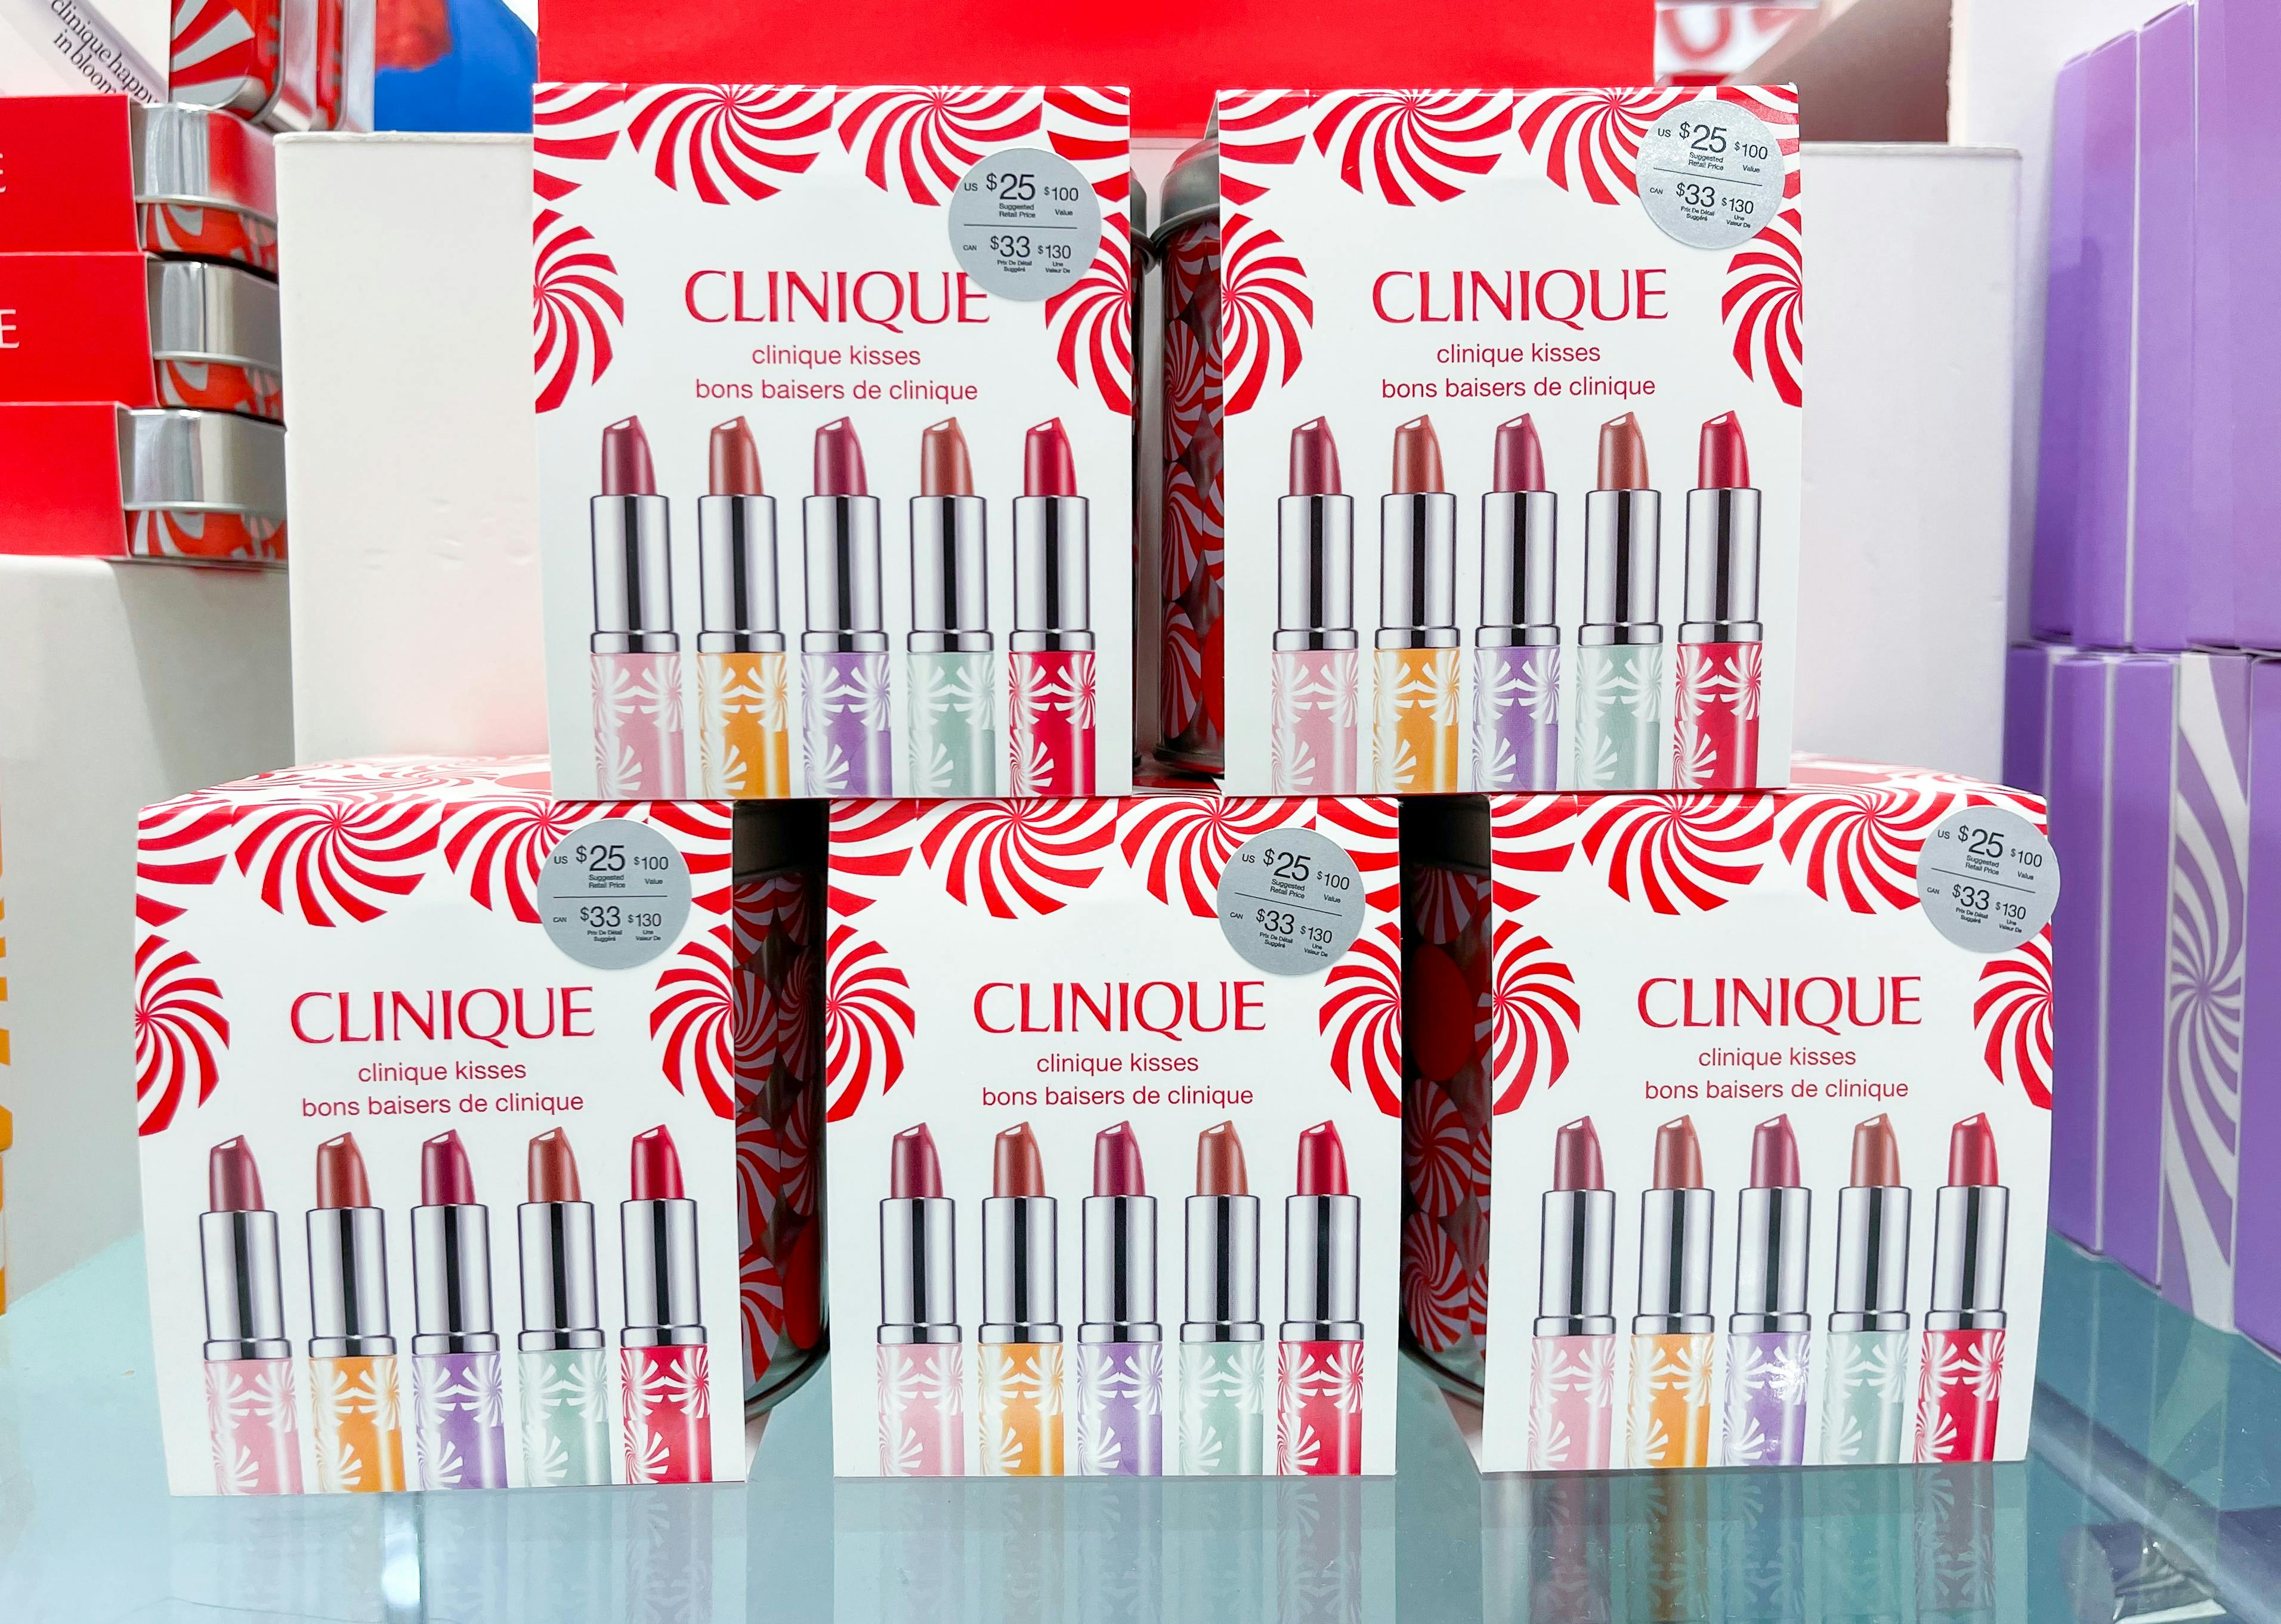 A display of Clinique makeup sets on a glass counter at Macy's.